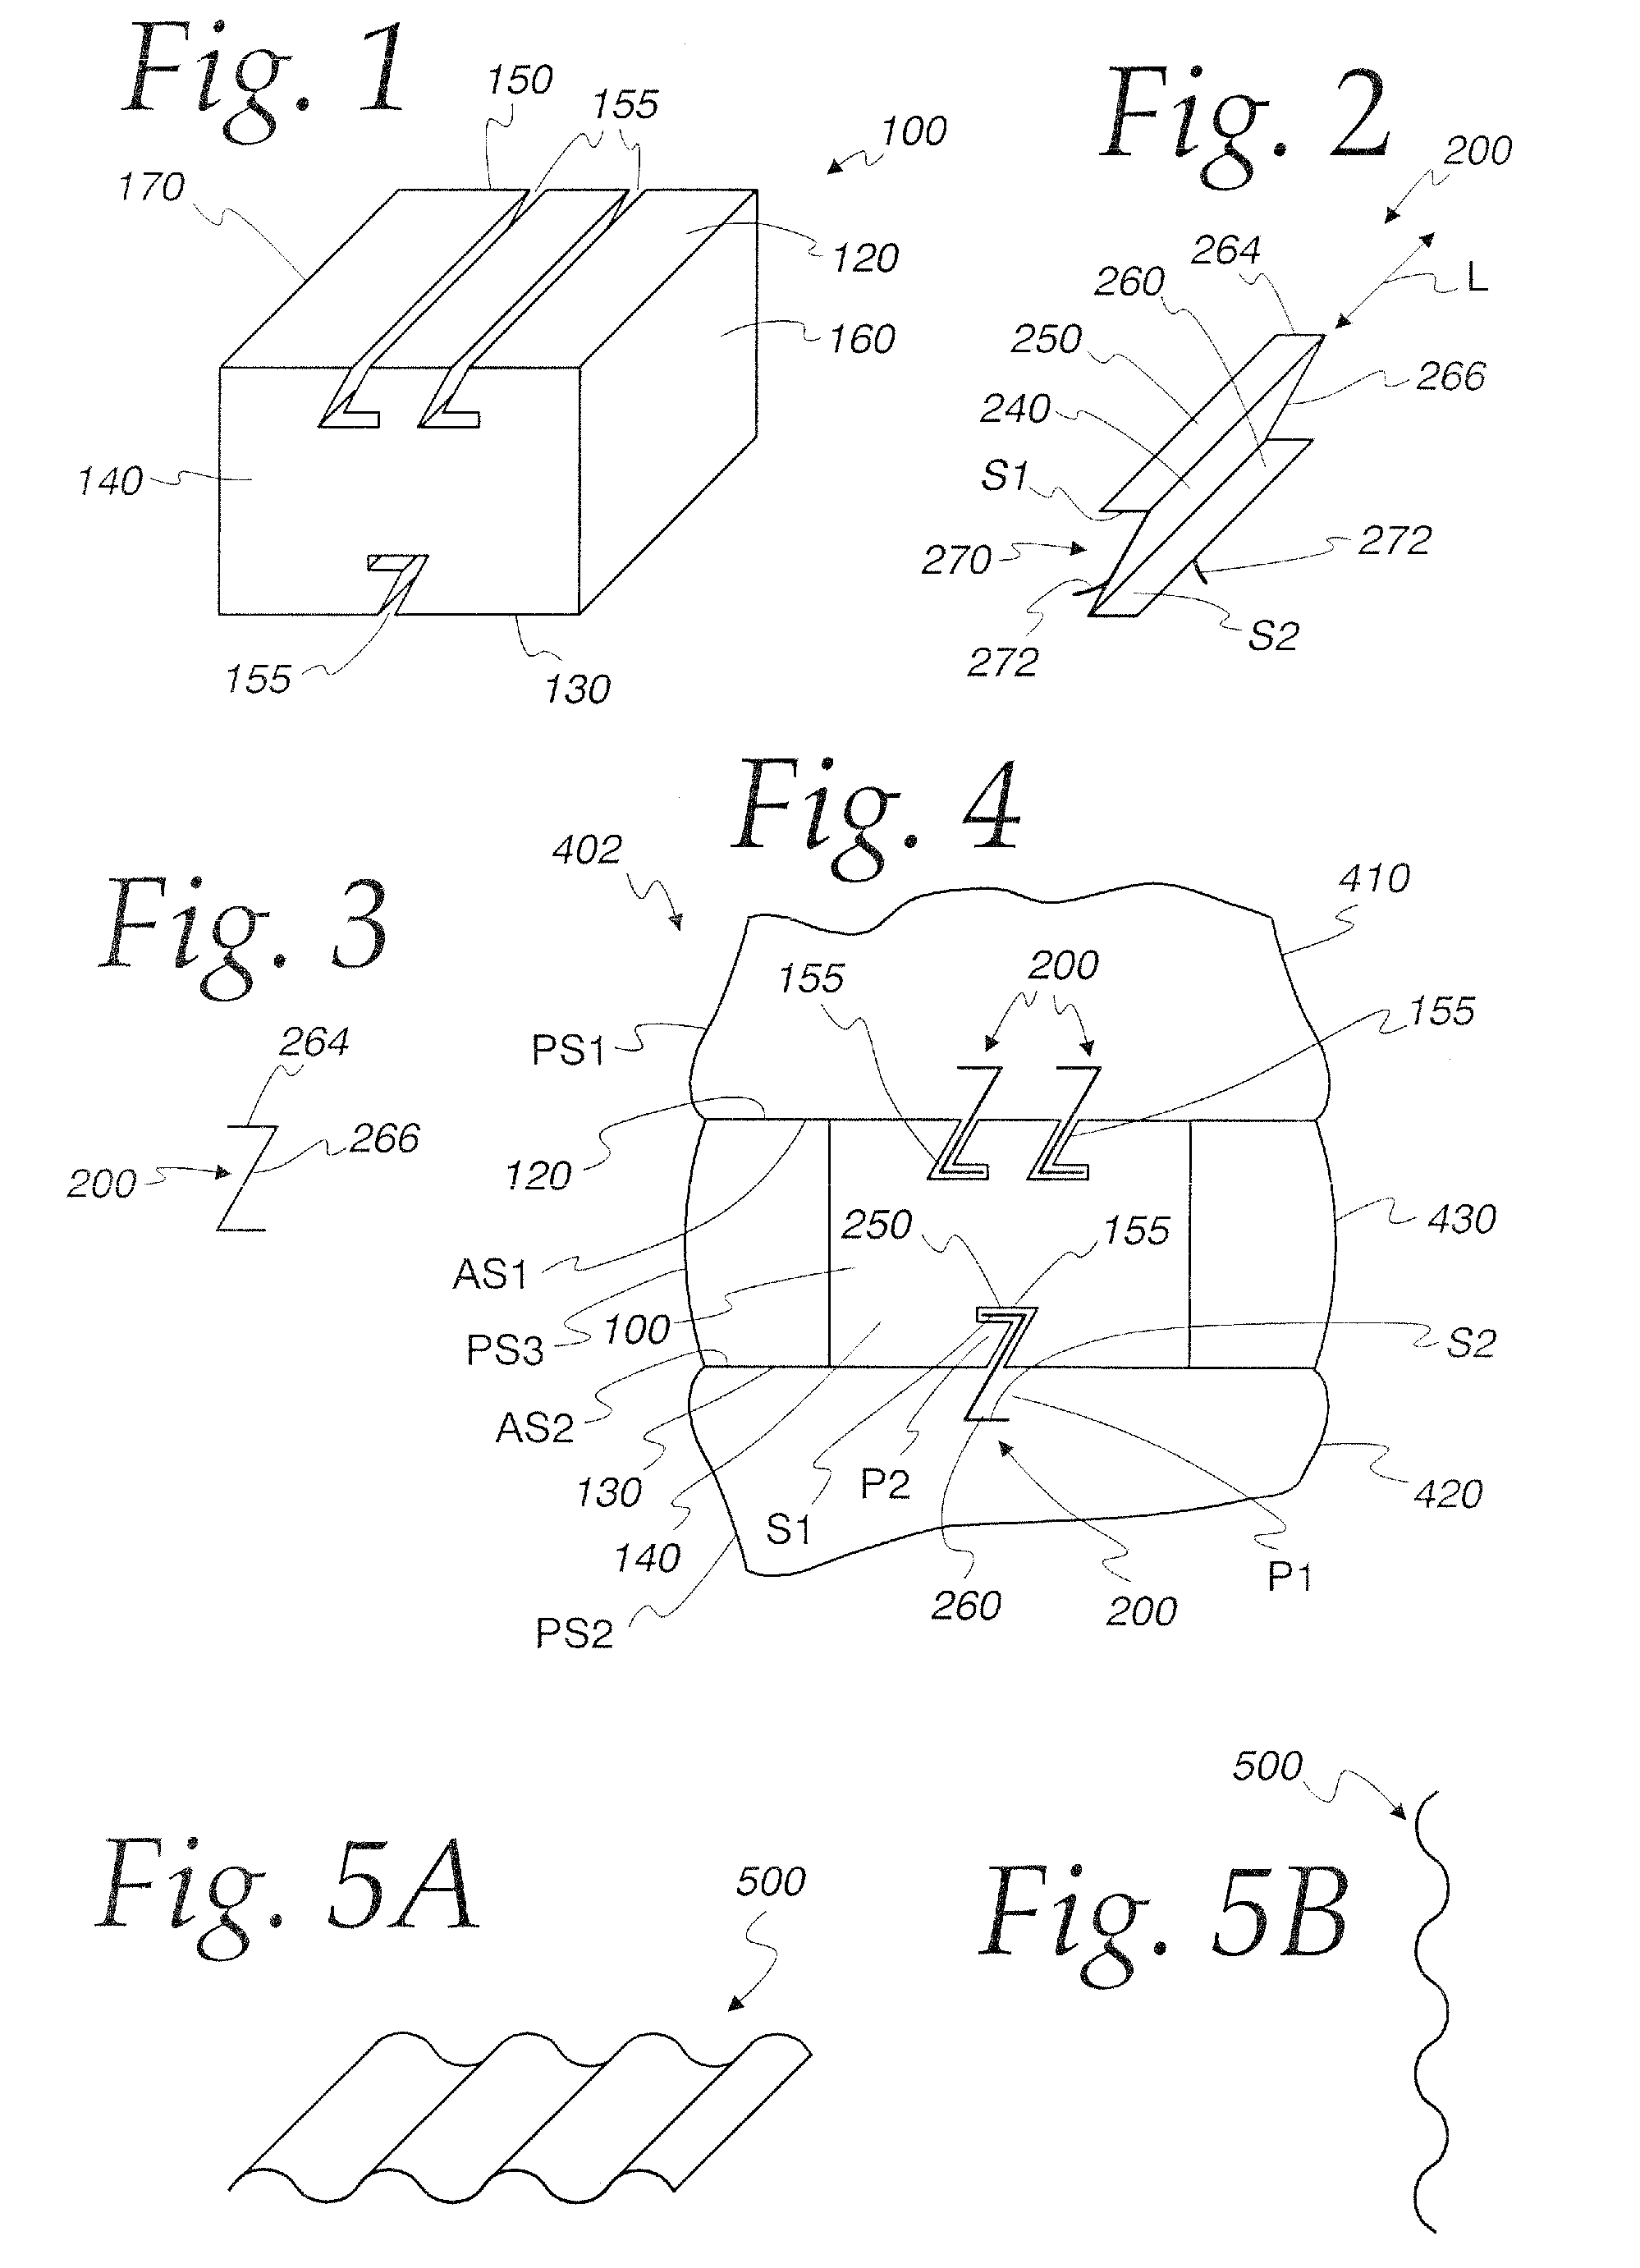 Apparatus and method for stabilizing adjacent bone portions